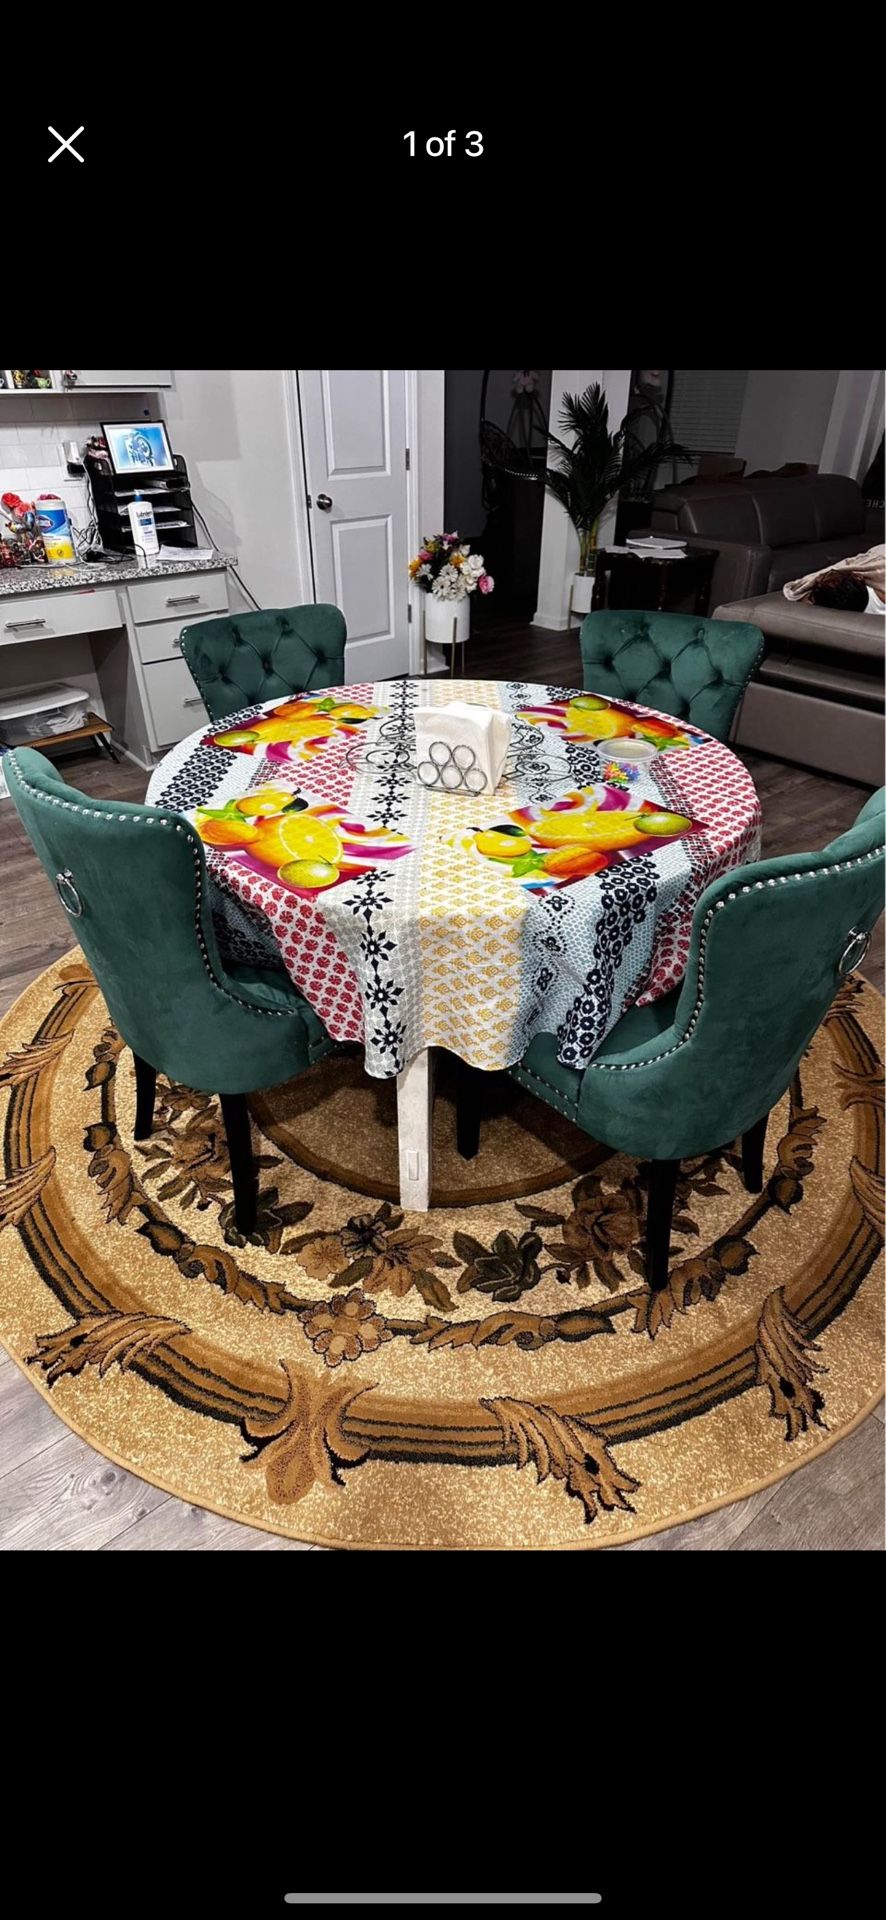 Dining Table With 4 Chairs and Carpet 